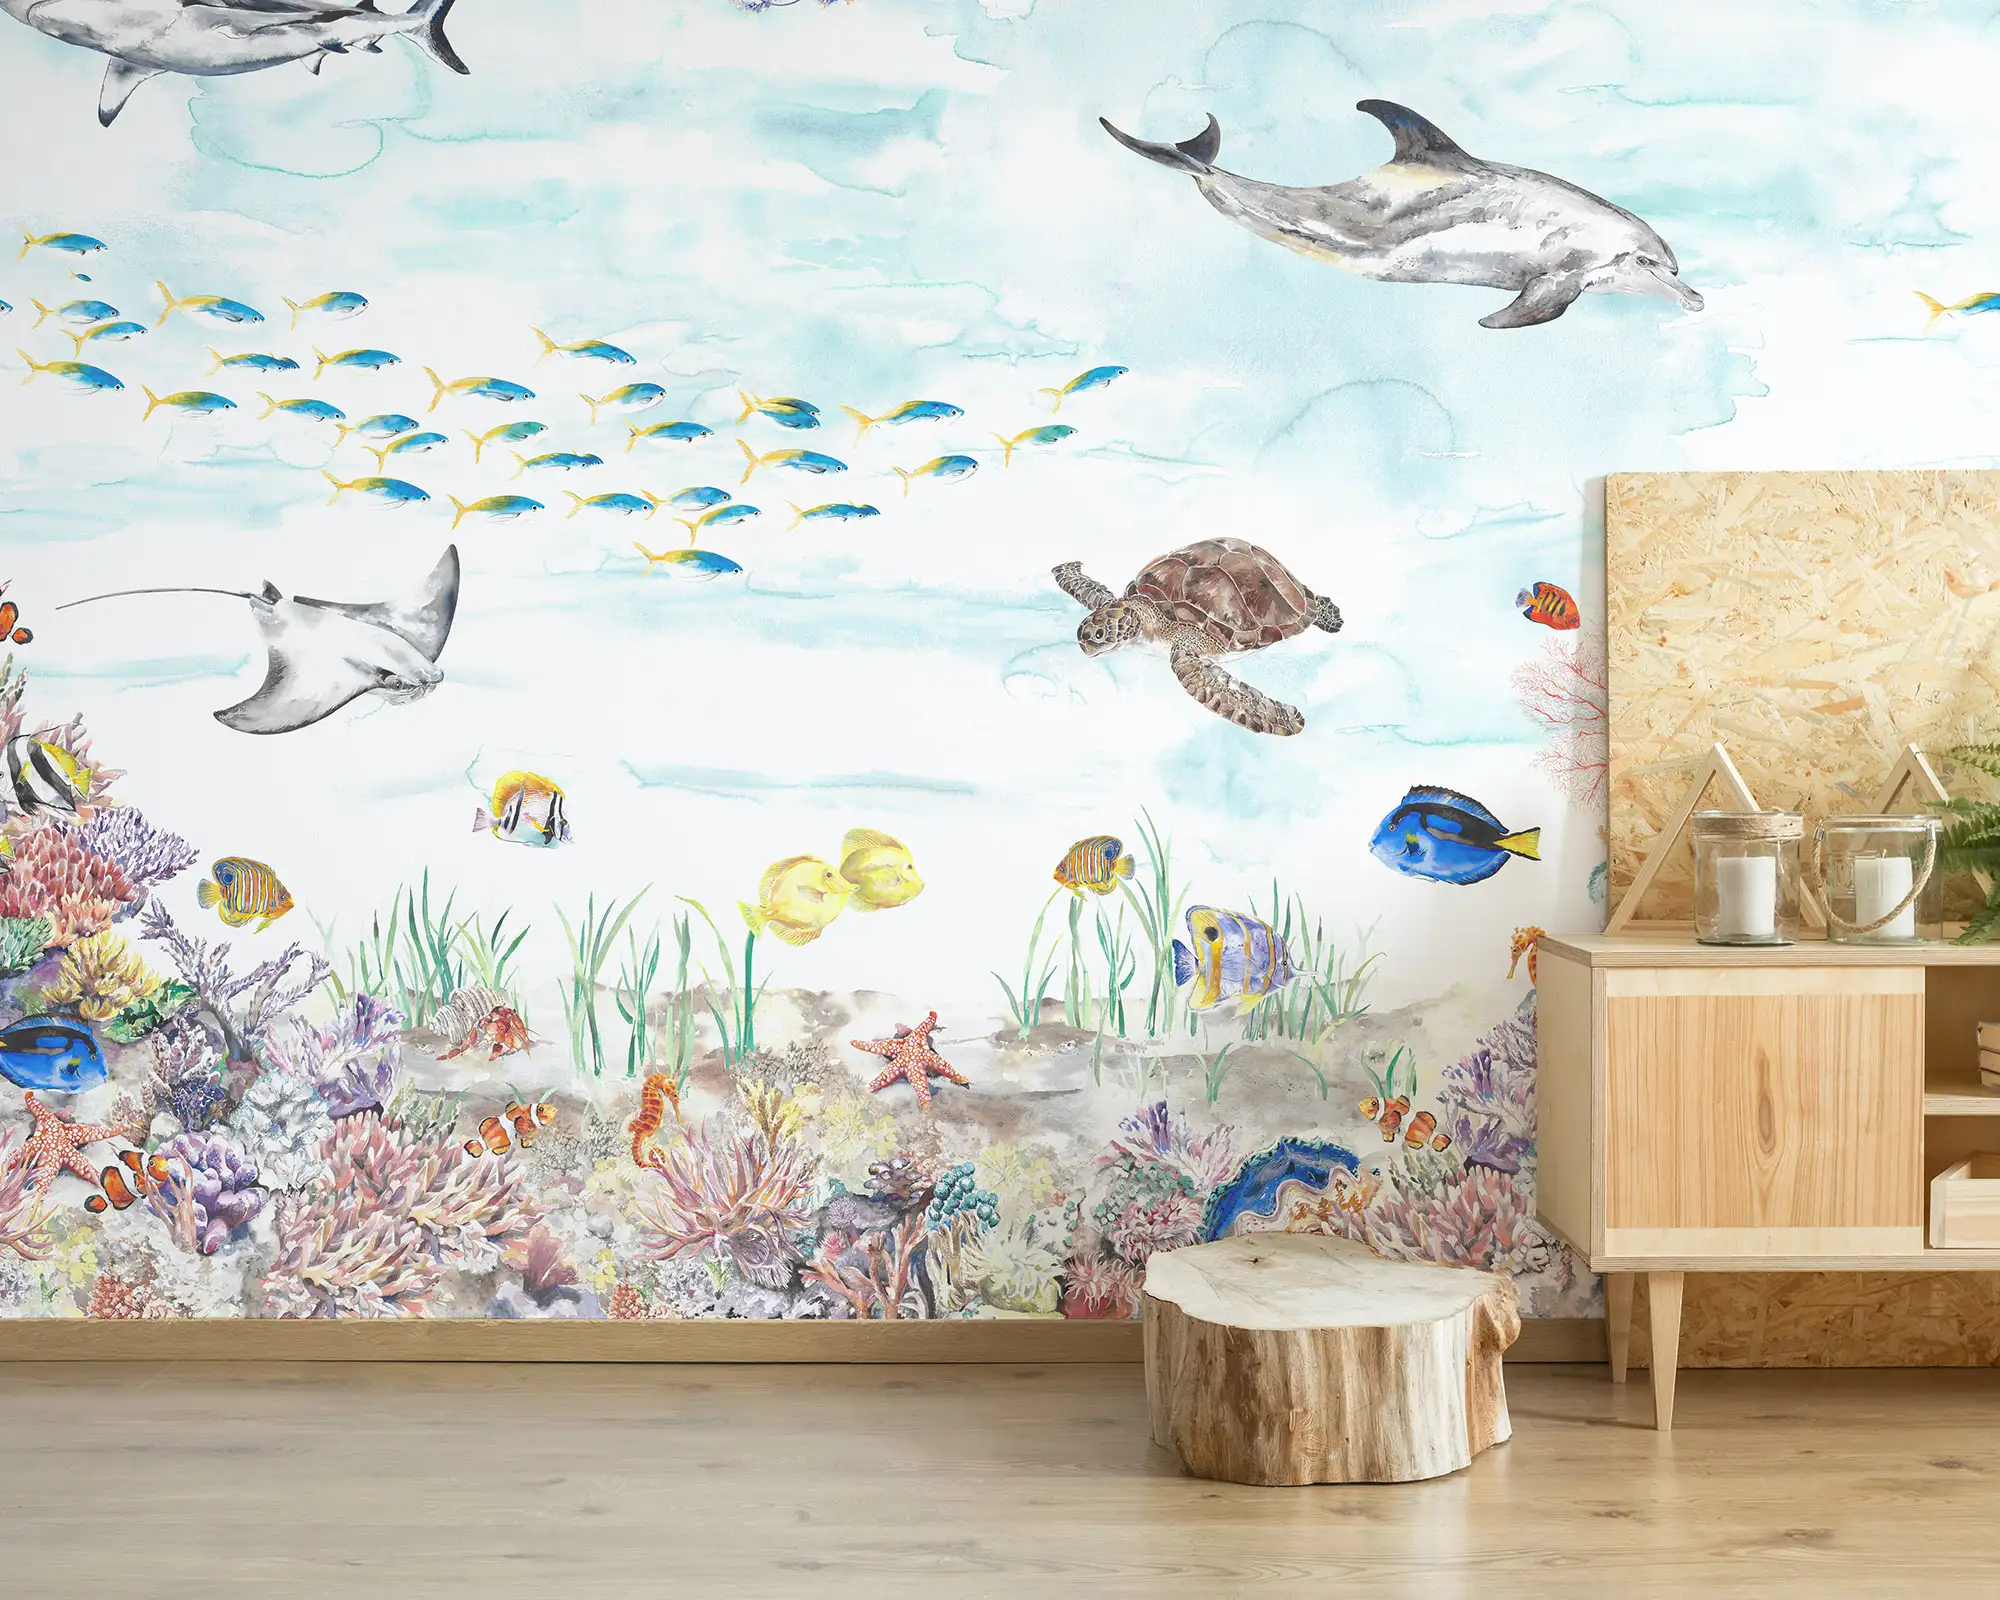 Coral Reef Under The Sea Mural Wallpaper